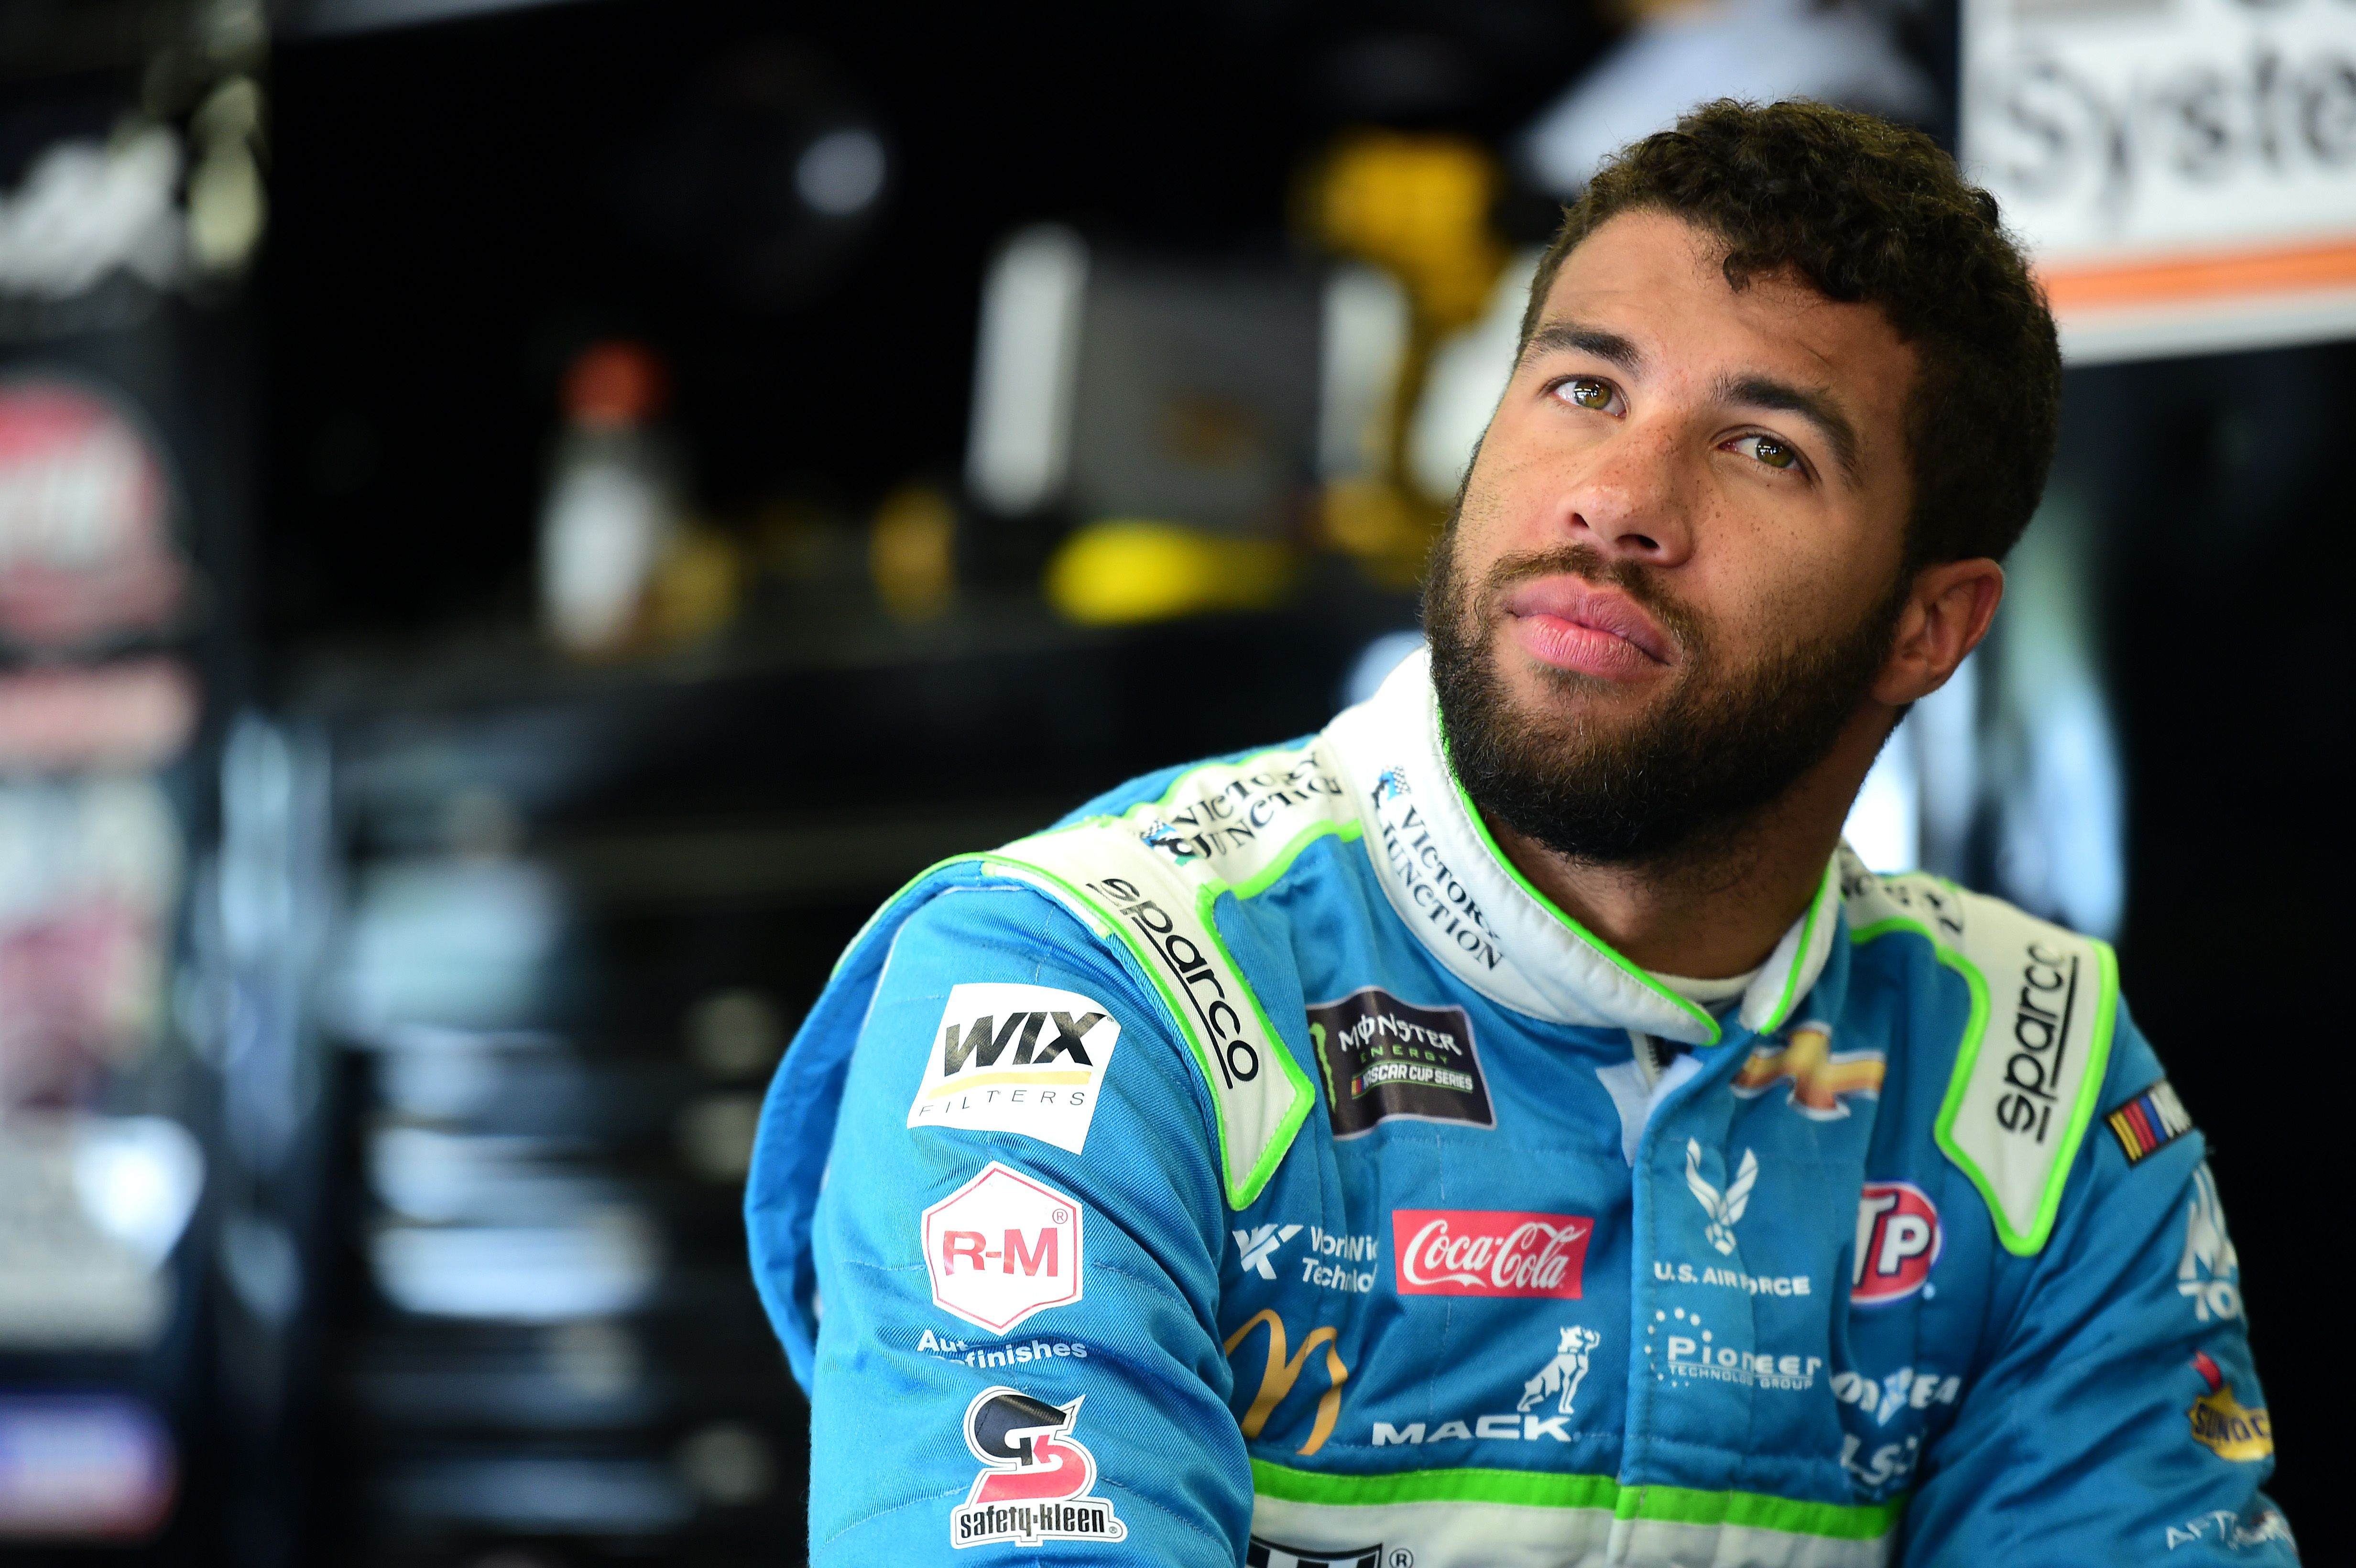 Bubba Wallace during practice for the Monster Energy NASCAR Cup Series Foxwoods Resort Casino 301 at New Hampshire Motor Speedway on July 20, 2019 in Loudon, New Hampshire | Photo: Getty Images